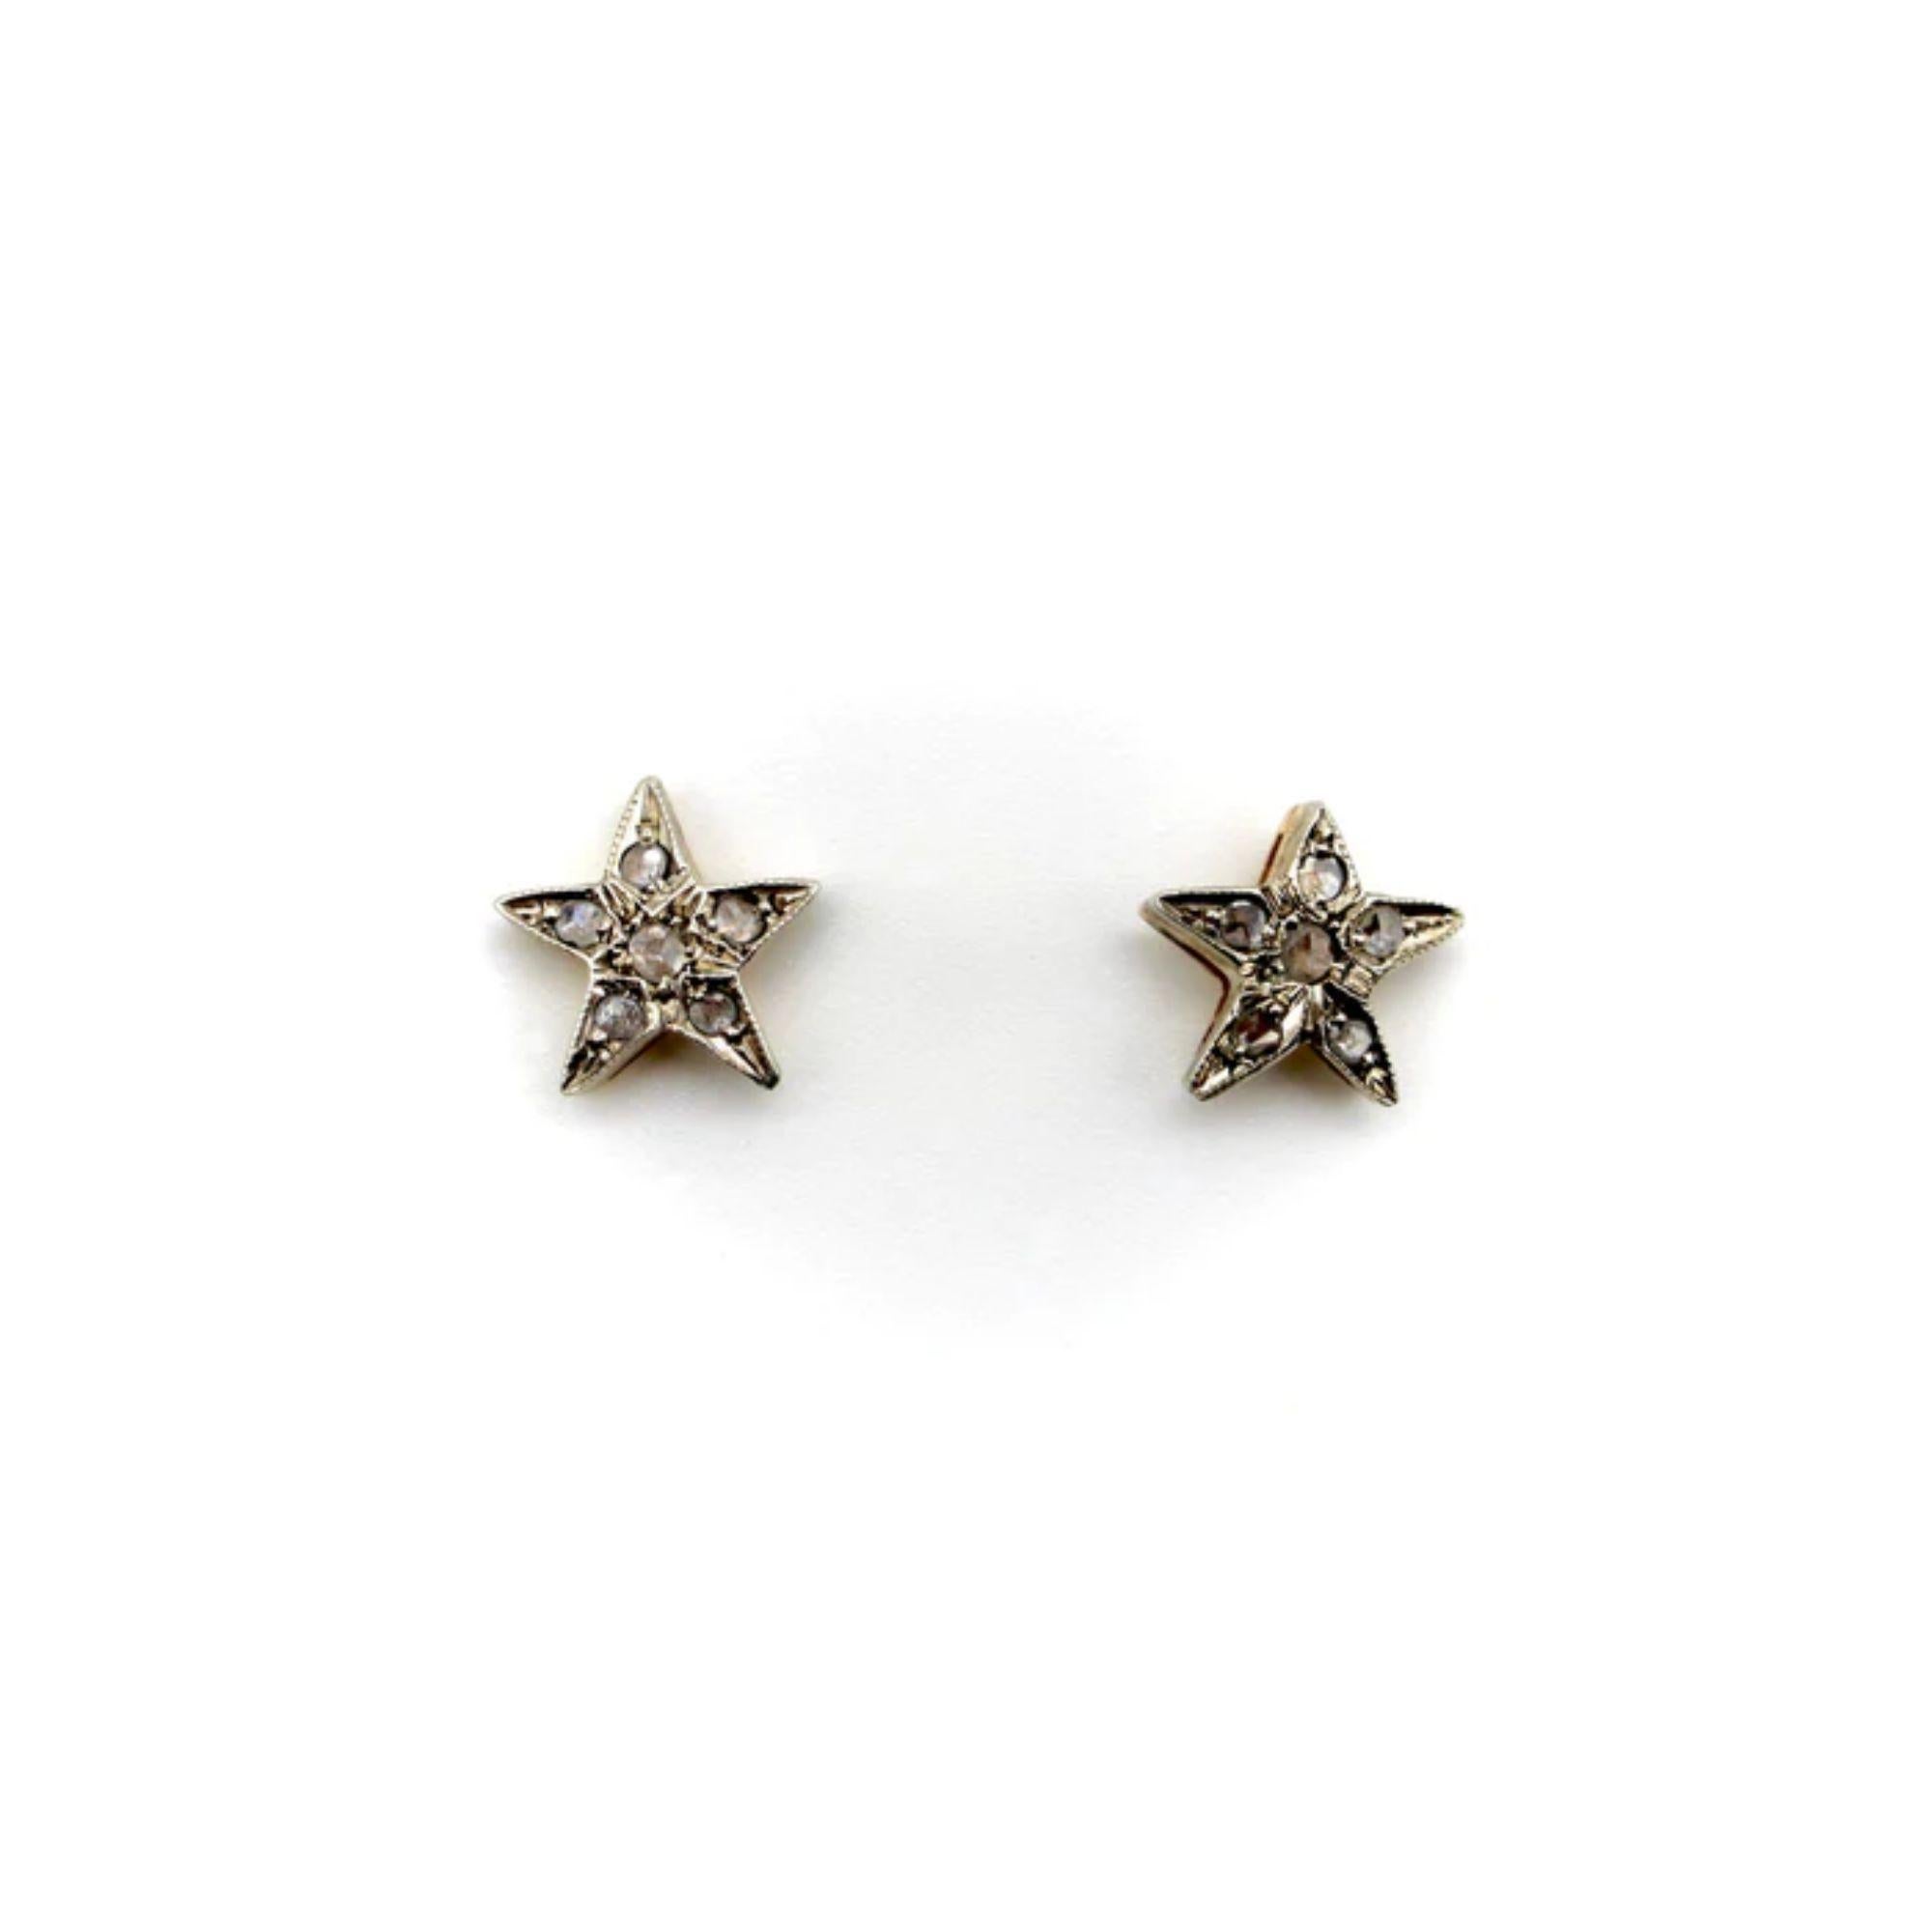 14K Gold and Silver Rose Cut Diamond Star Earrings, circa 1970's or 1980's

These charming little star earrings are slightly asymmetrical, as if they were drawn by hand, or were two starfish found on the beach. Each of the star’s five points are